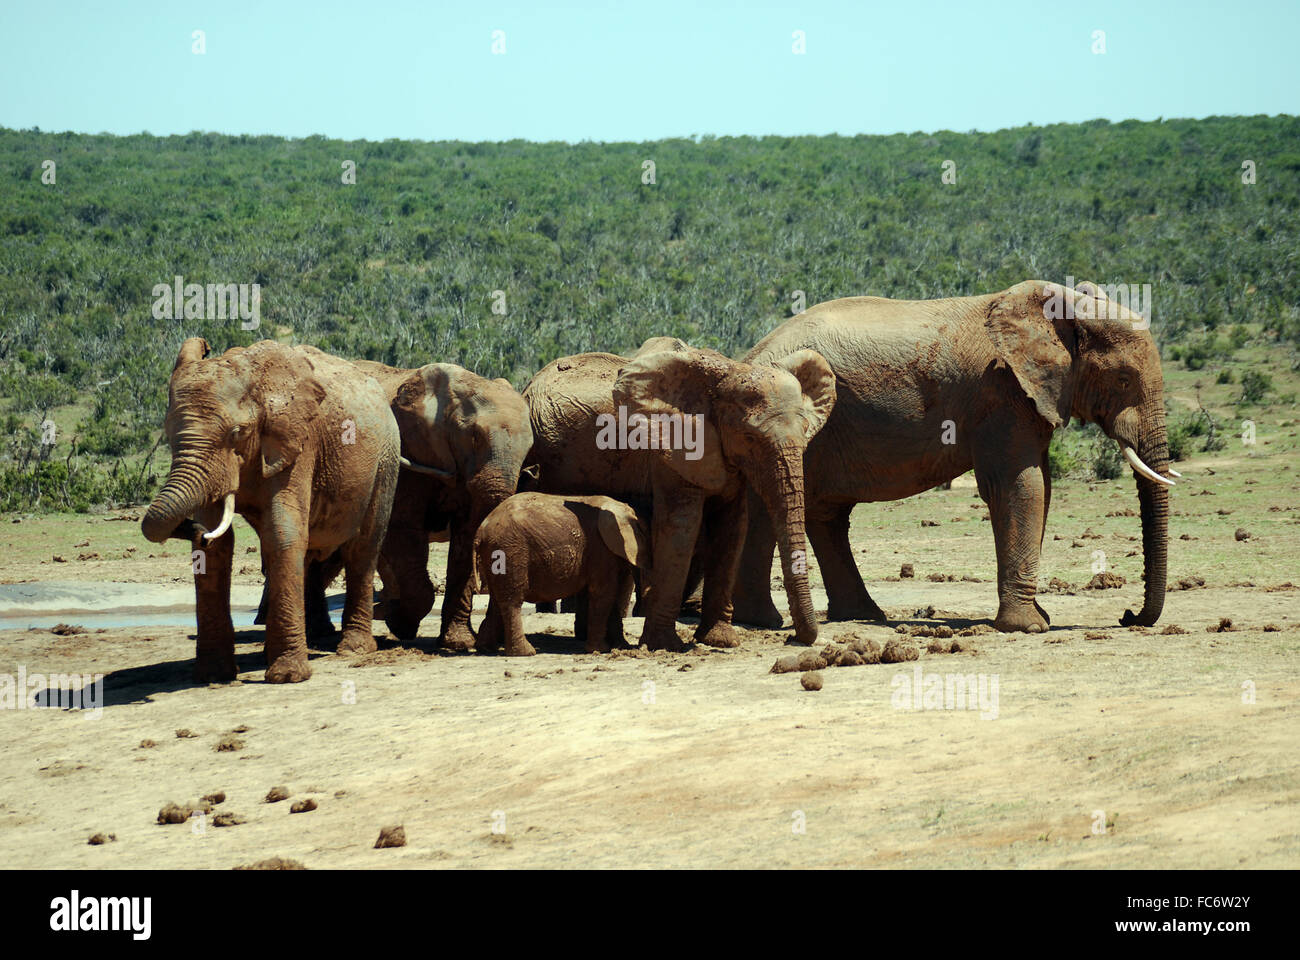 elephant family in south africa Stock Photo